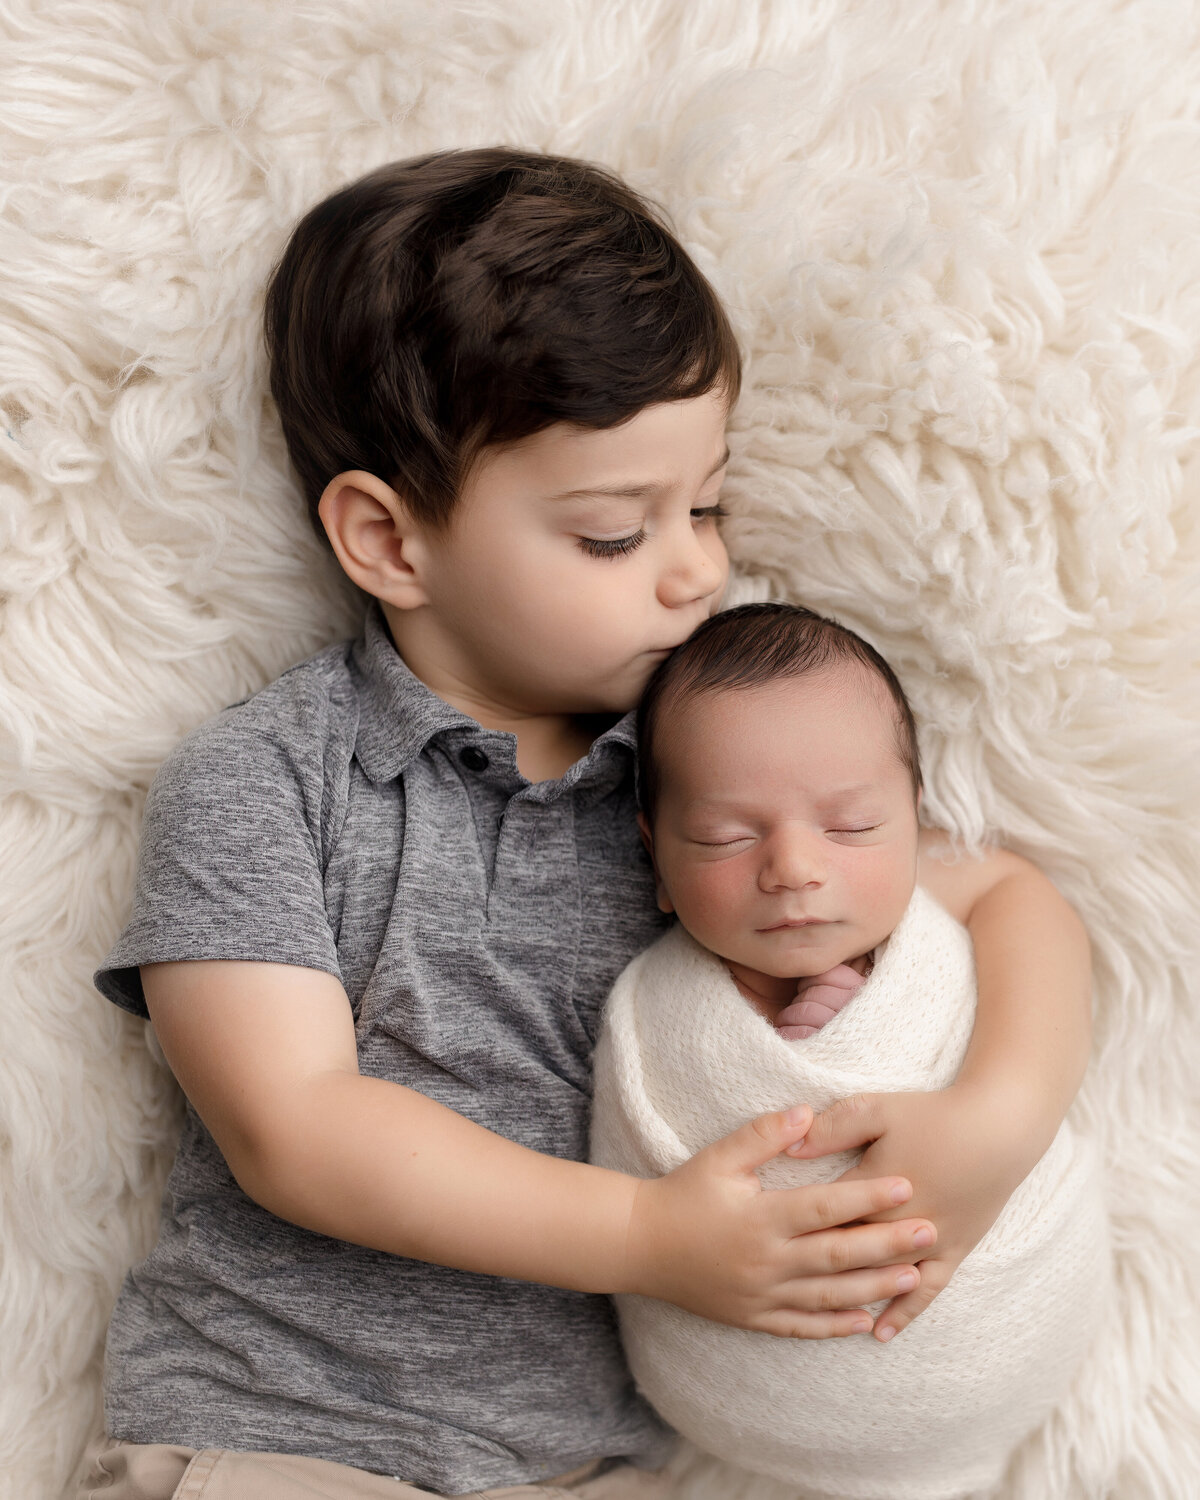 Newborn photoshoot in West Palm Beach and Jupiter photography studio. Big brother's arms are gently hugging baby brother atop of a fuzzy long faux fur rug. Baby's head is resting on big brother's shoulder and big brother is kissing the stop of his head. Baby is in a cream knit wrap with his fingers peeking out the top. Aerial image.